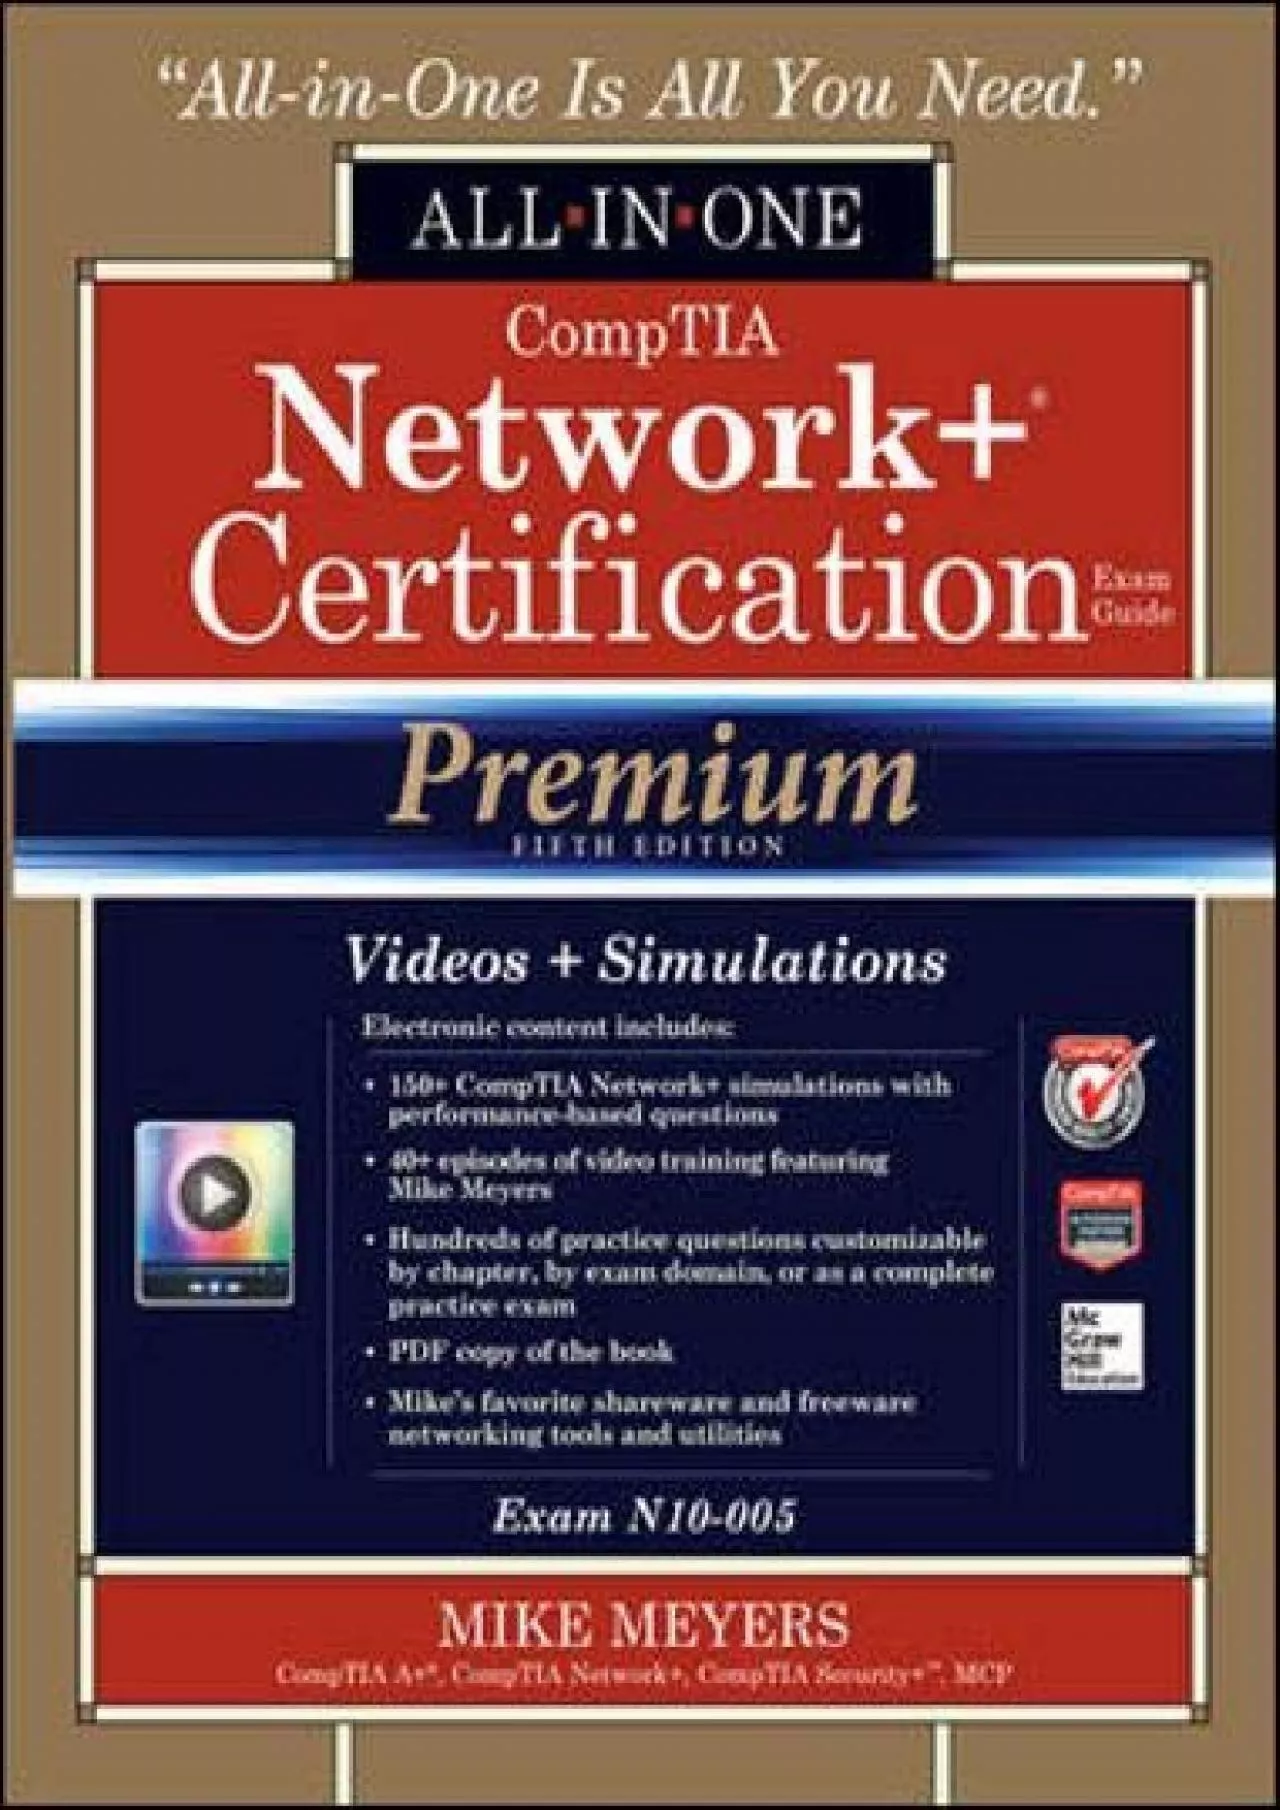 [eBOOK]-CompTIA Network+ Certification All-in-One Exam Guide, Premium Fifth Edition (Exam